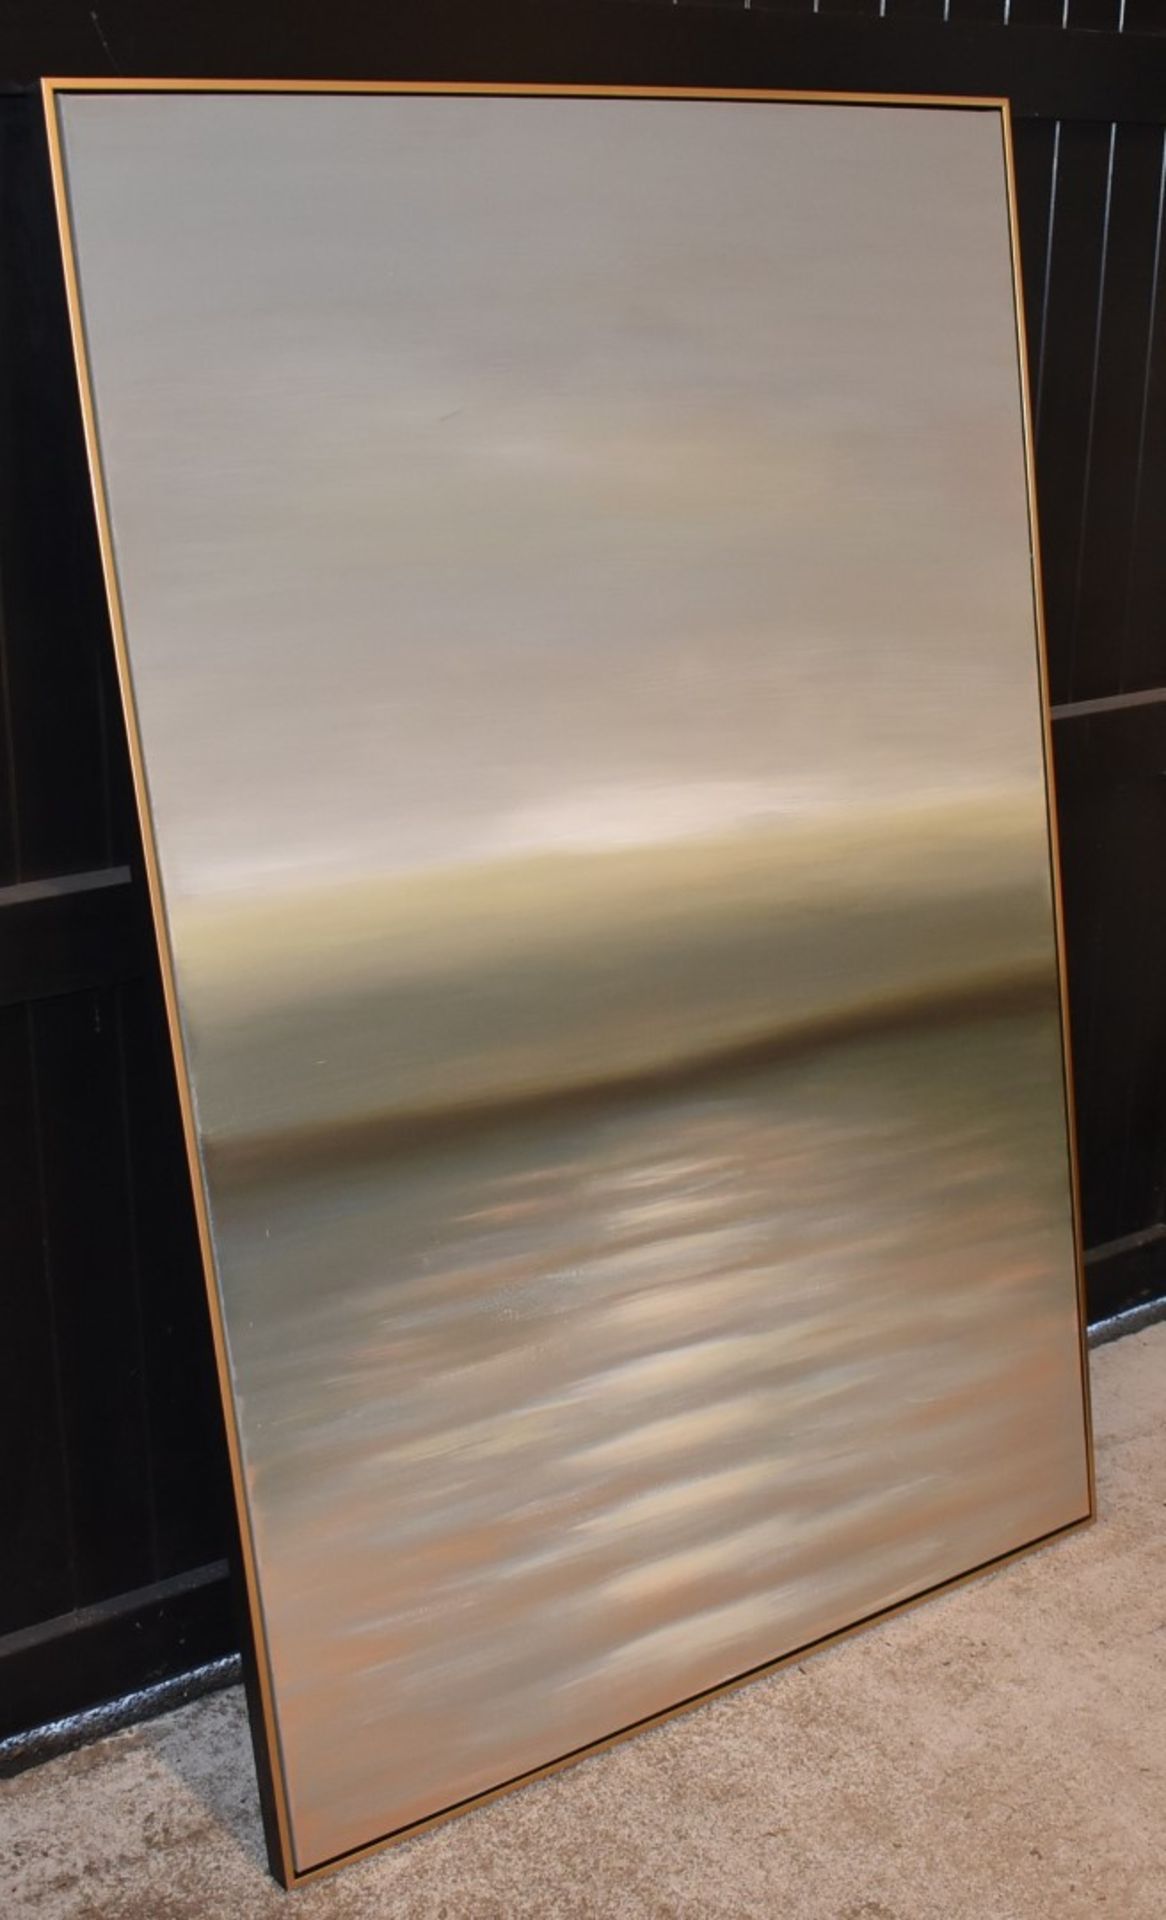 1 x Dusk Canvas Hand Painted Wall Art in Gold Frame - Large Size - RRP £255 - NO VAT ON THE HAMMER! - Image 3 of 8